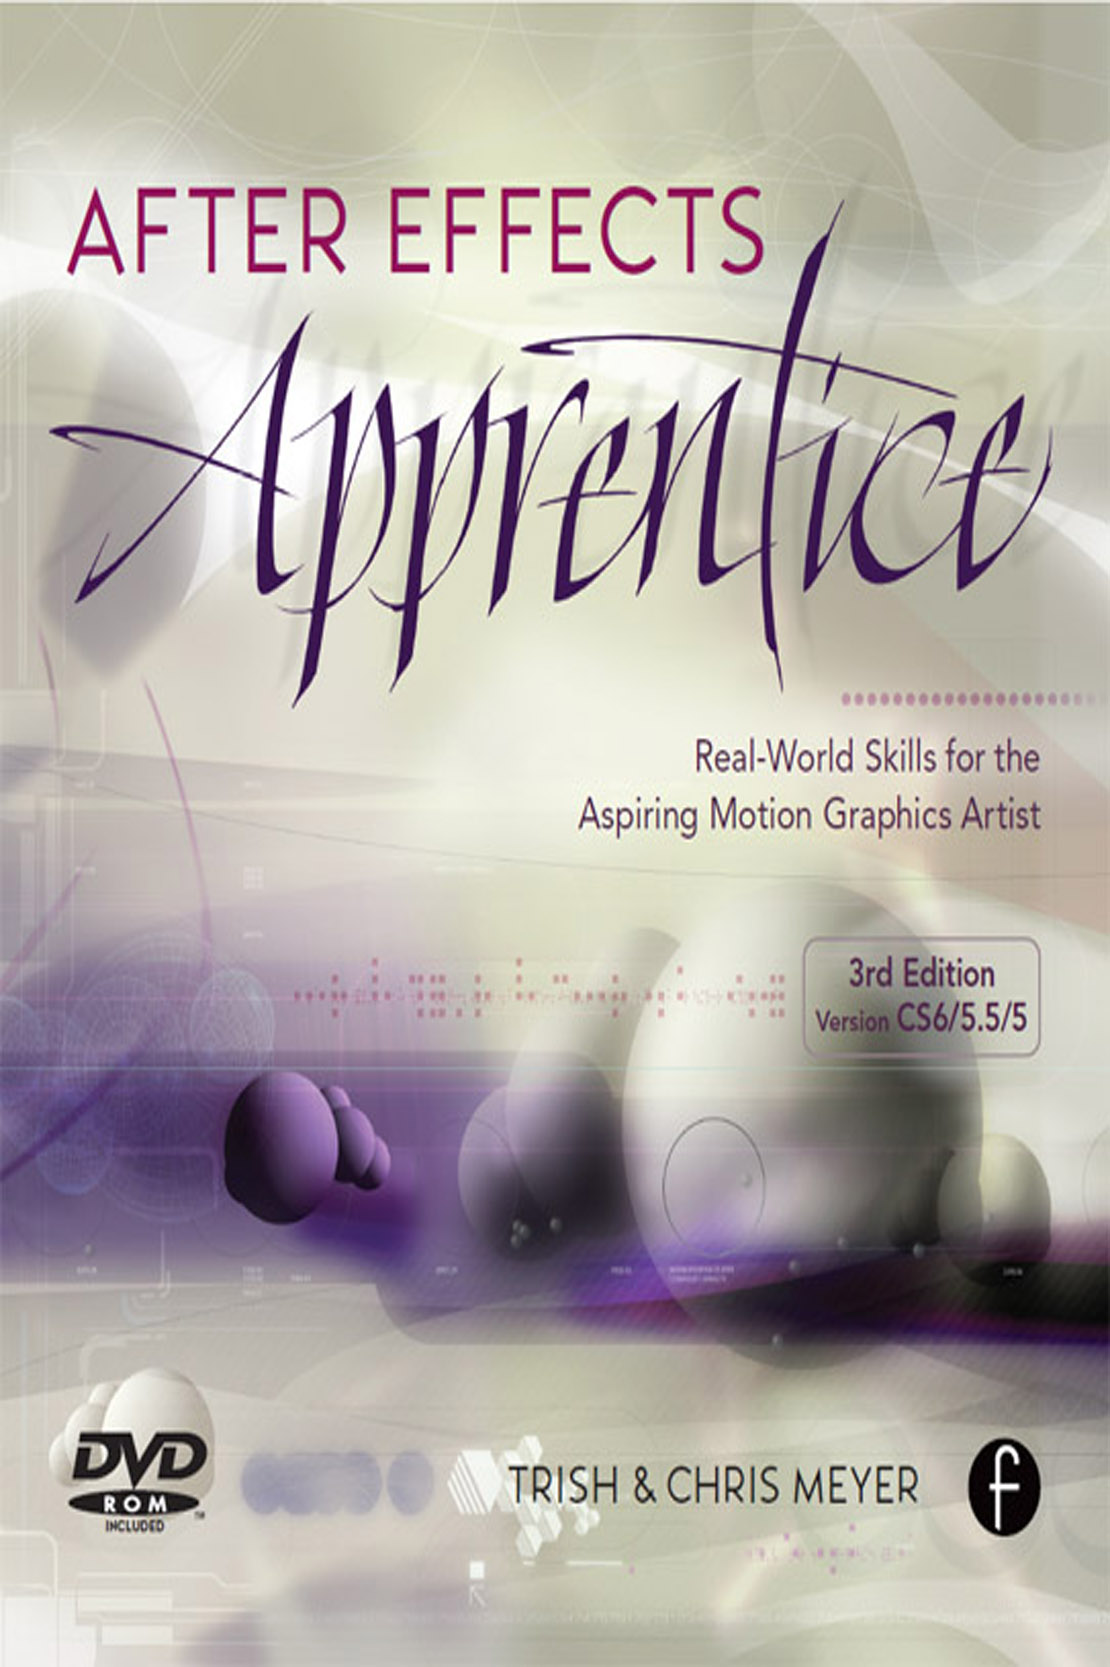 after effects apprentice meyer 4th edition download